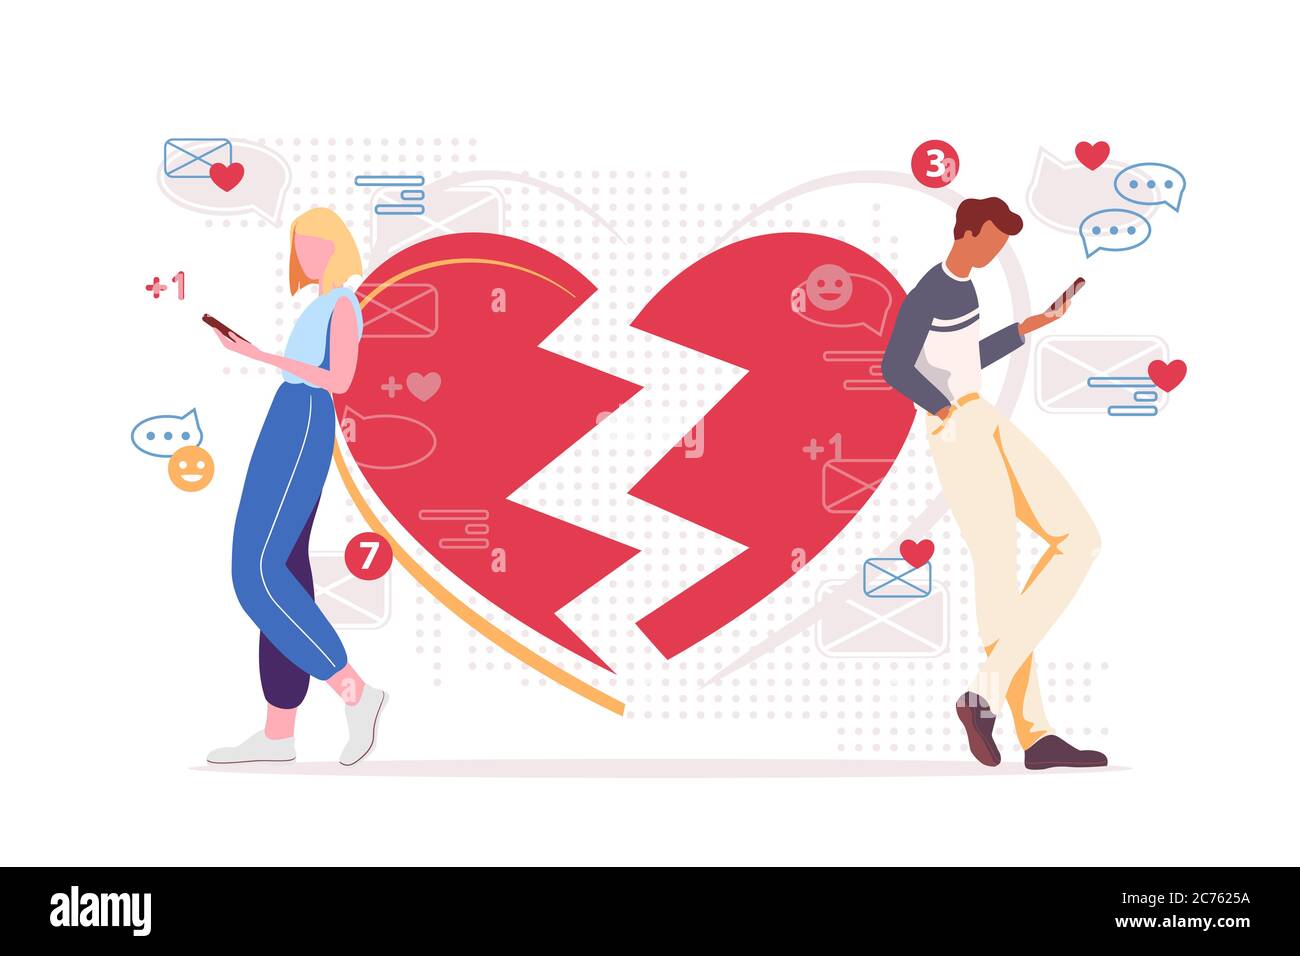 Couple social media addiction illustration. Networking destroys relationship concept. Two people chatting and ignoring each other. Online communication problem. Distance in family due to gadgets. Stock Vector